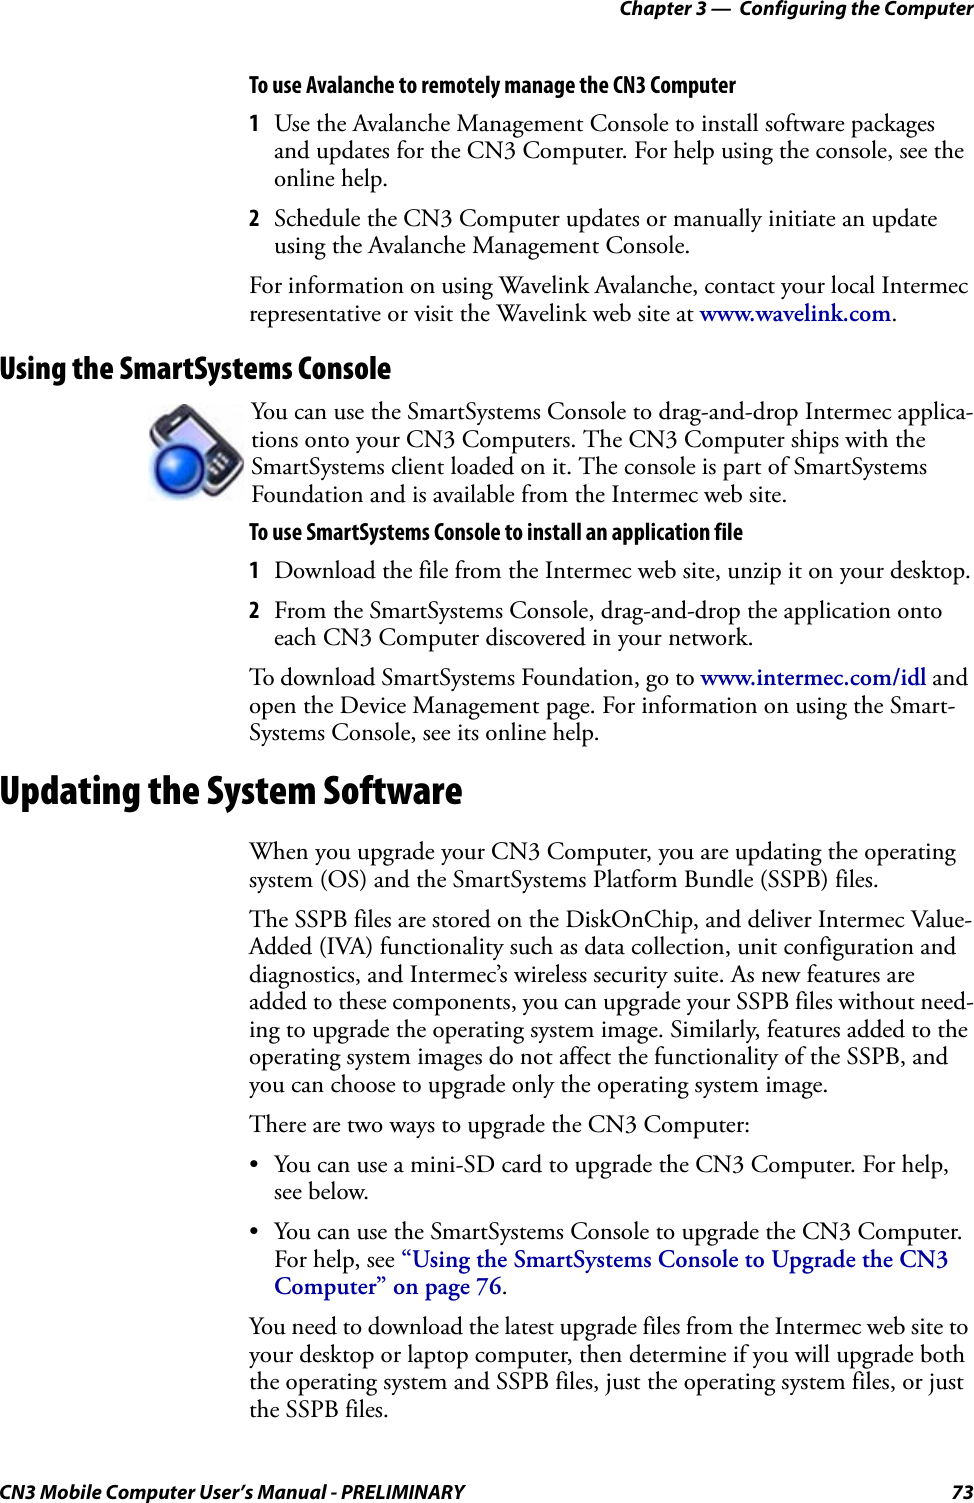 Chapter 3 —  Configuring the ComputerCN3 Mobile Computer User’s Manual - PRELIMINARY 73To use Avalanche to remotely manage the CN3 Computer1Use the Avalanche Management Console to install software packages and updates for the CN3 Computer. For help using the console, see the online help.2Schedule the CN3 Computer updates or manually initiate an update using the Avalanche Management Console. For information on using Wavelink Avalanche, contact your local Intermec representative or visit the Wavelink web site at www.wavelink.com.Using the SmartSystems ConsoleTo use SmartSystems Console to install an application file1Download the file from the Intermec web site, unzip it on your desktop.2From the SmartSystems Console, drag-and-drop the application onto each CN3 Computer discovered in your network.To download SmartSystems Foundation, go to www.intermec.com/idl and open the Device Management page. For information on using the Smart-Systems Console, see its online help.Updating the System SoftwareWhen you upgrade your CN3 Computer, you are updating the operating system (OS) and the SmartSystems Platform Bundle (SSPB) files.The SSPB files are stored on the DiskOnChip, and deliver Intermec Value-Added (IVA) functionality such as data collection, unit configuration and diagnostics, and Intermec’s wireless security suite. As new features are added to these components, you can upgrade your SSPB files without need-ing to upgrade the operating system image. Similarly, features added to the operating system images do not affect the functionality of the SSPB, and you can choose to upgrade only the operating system image.There are two ways to upgrade the CN3 Computer:• You can use a mini-SD card to upgrade the CN3 Computer. For help, see below.• You can use the SmartSystems Console to upgrade the CN3 Computer. For help, see “Using the SmartSystems Console to Upgrade the CN3 Computer” on page 76.You need to download the latest upgrade files from the Intermec web site to your desktop or laptop computer, then determine if you will upgrade both the operating system and SSPB files, just the operating system files, or just the SSPB files.You can use the SmartSystems Console to drag-and-drop Intermec applica-tions onto your CN3 Computers. The CN3 Computer ships with the SmartSystems client loaded on it. The console is part of SmartSystems Foundation and is available from the Intermec web site. 